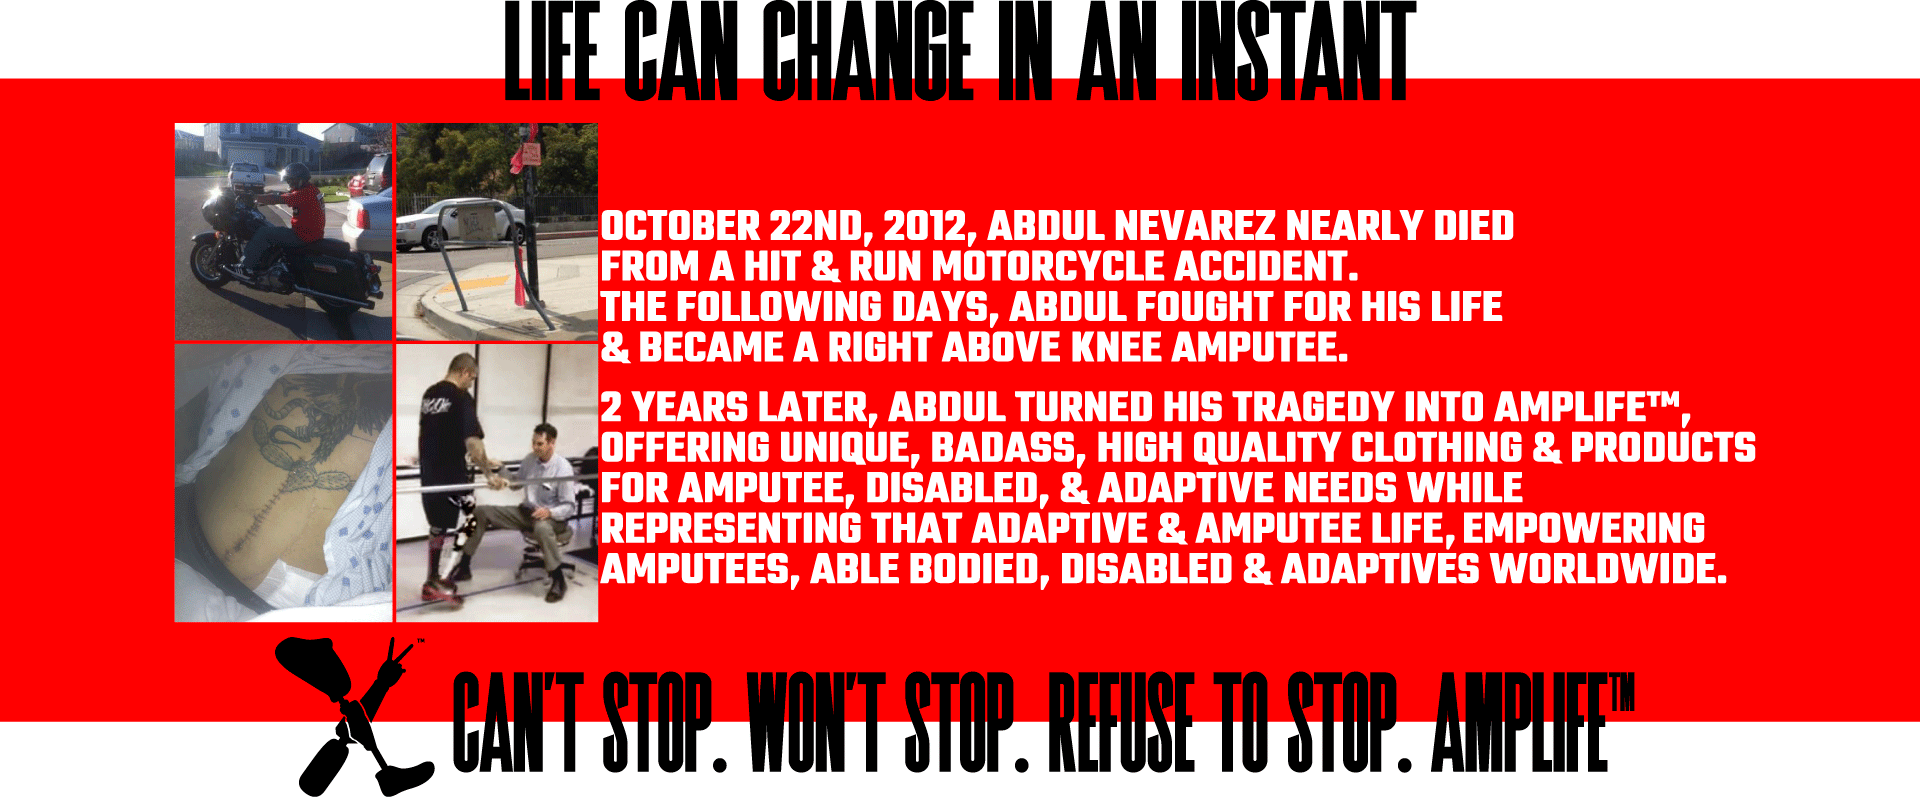 LIFE CAN CHANGE IN AN INSTANT. OCTOBER 22ND, 2012, ABDUL NEVAREZ NEARLY DIED FROM A HIT & RUN MOTORCYCLE ACCIDENT. THE FOLLOWING DAYS, ABDUL FOUGHT FOR HIS LIFE & BECAME A RIGHT ABOVE KNEE AMPUTEE. LEARN MORE ABOUT AMPLIFE™